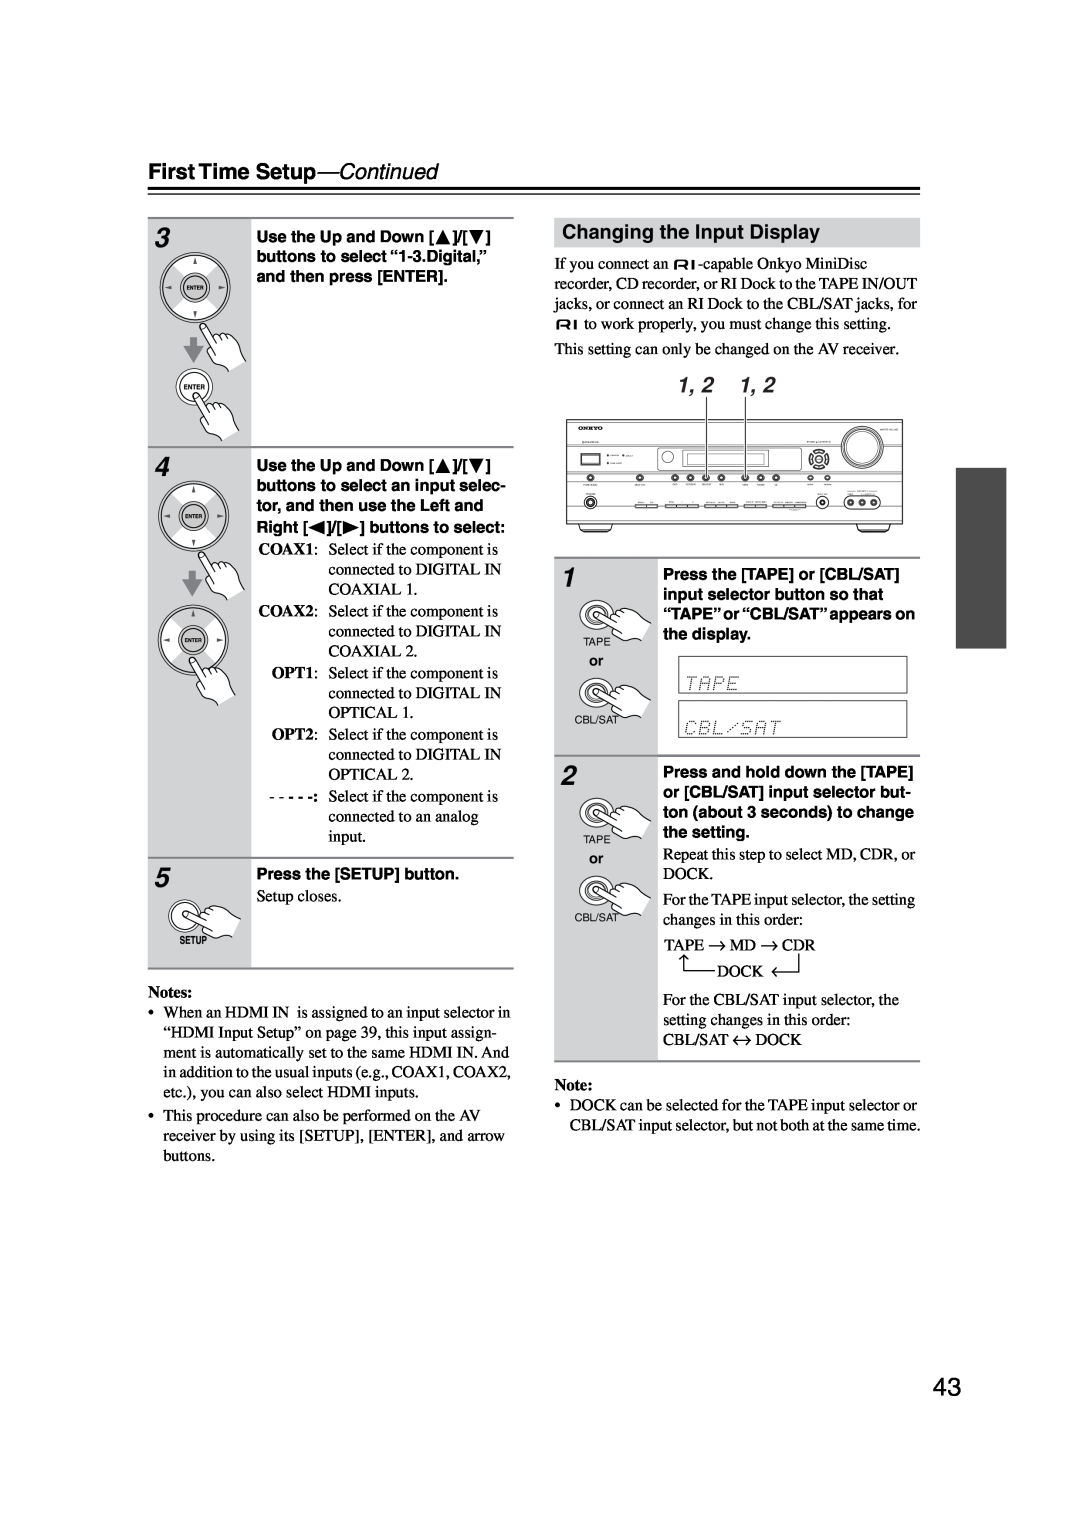 Onkyo TX-SR576, TX-SR506 instruction manual Changing the Input Display, First Time Setup—Continued, Setup closes, Notes 